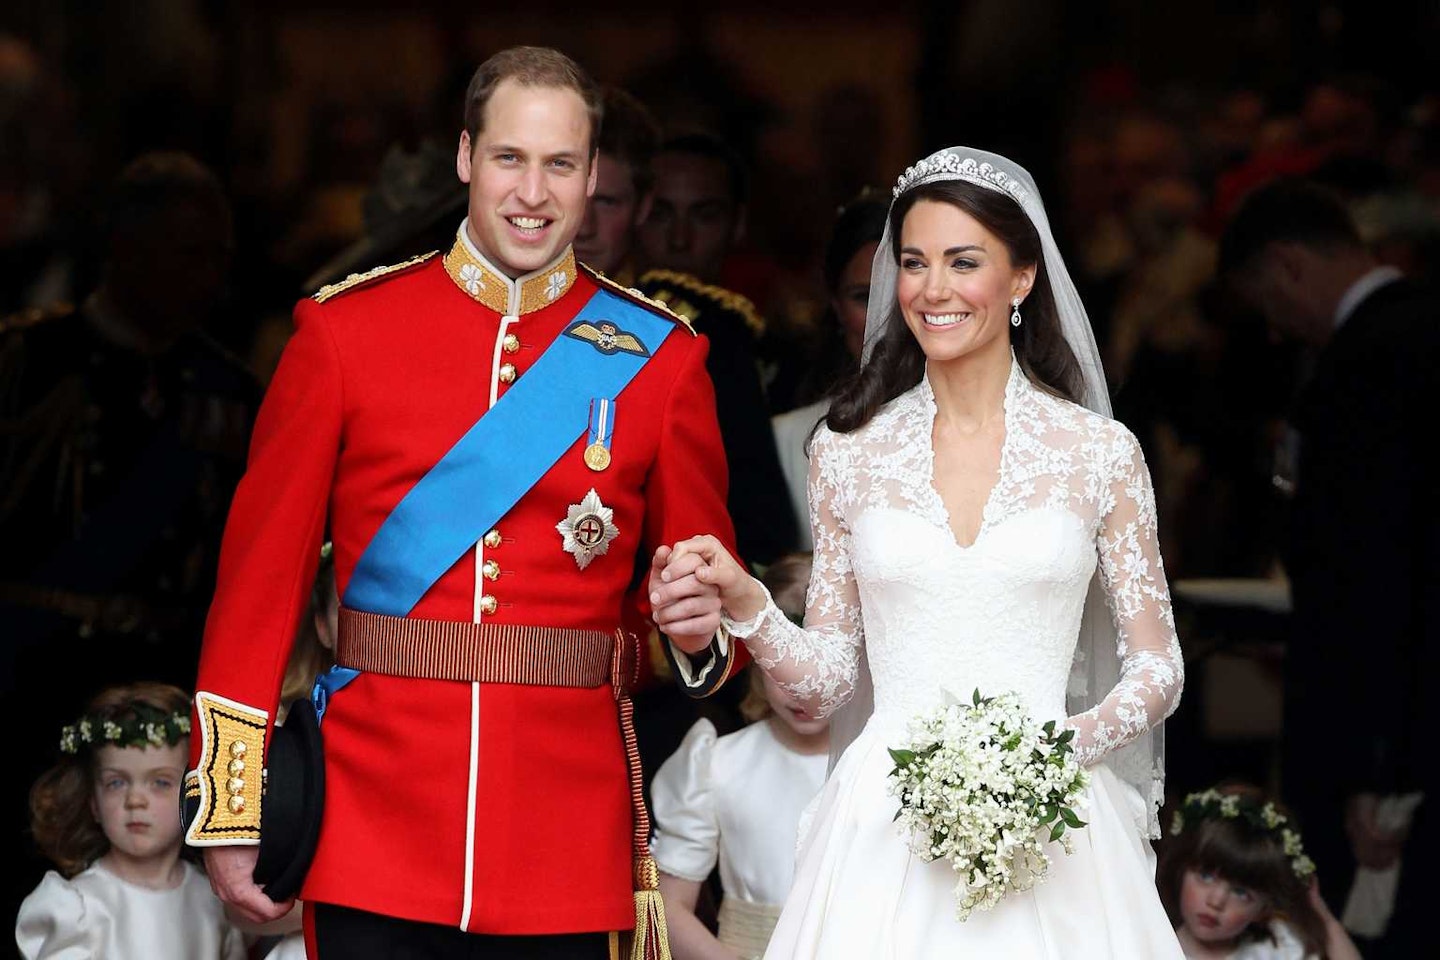 A Definitive Timeline Of Kate Middleton And Prince William's Relationship